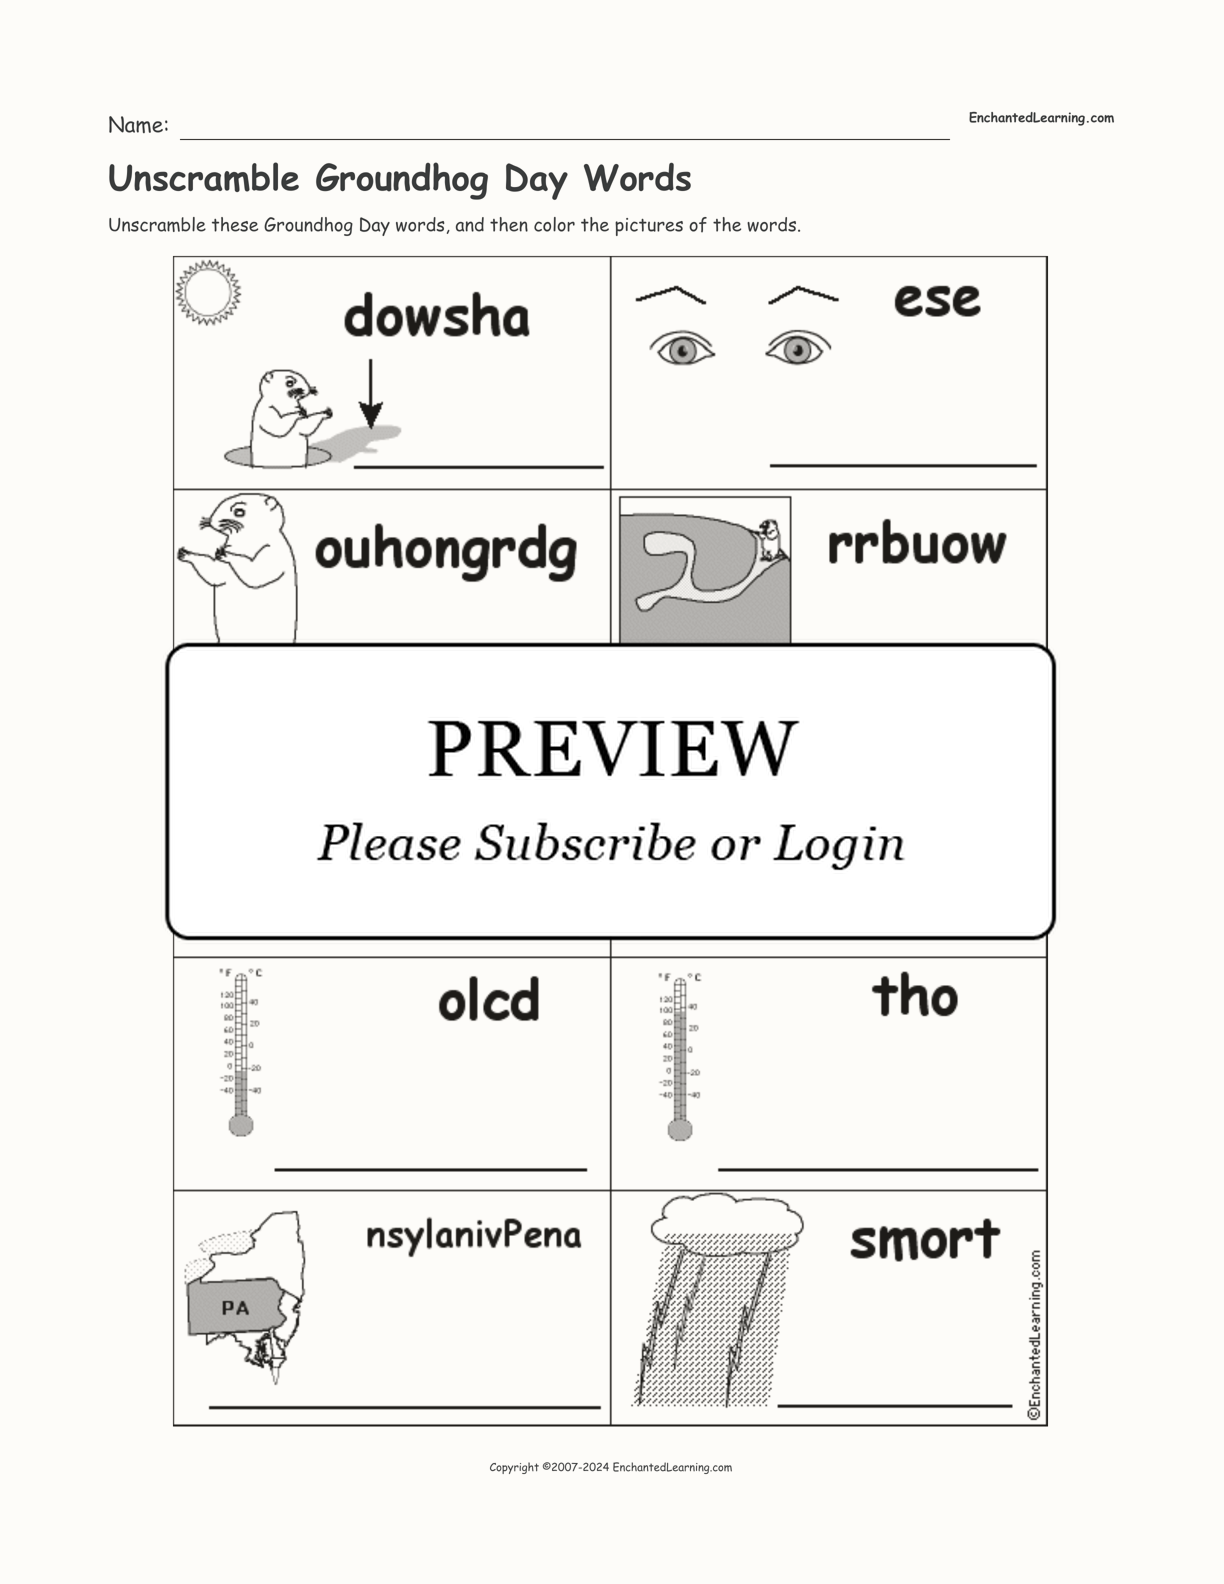 Unscramble Groundhog Day Words interactive worksheet page 1